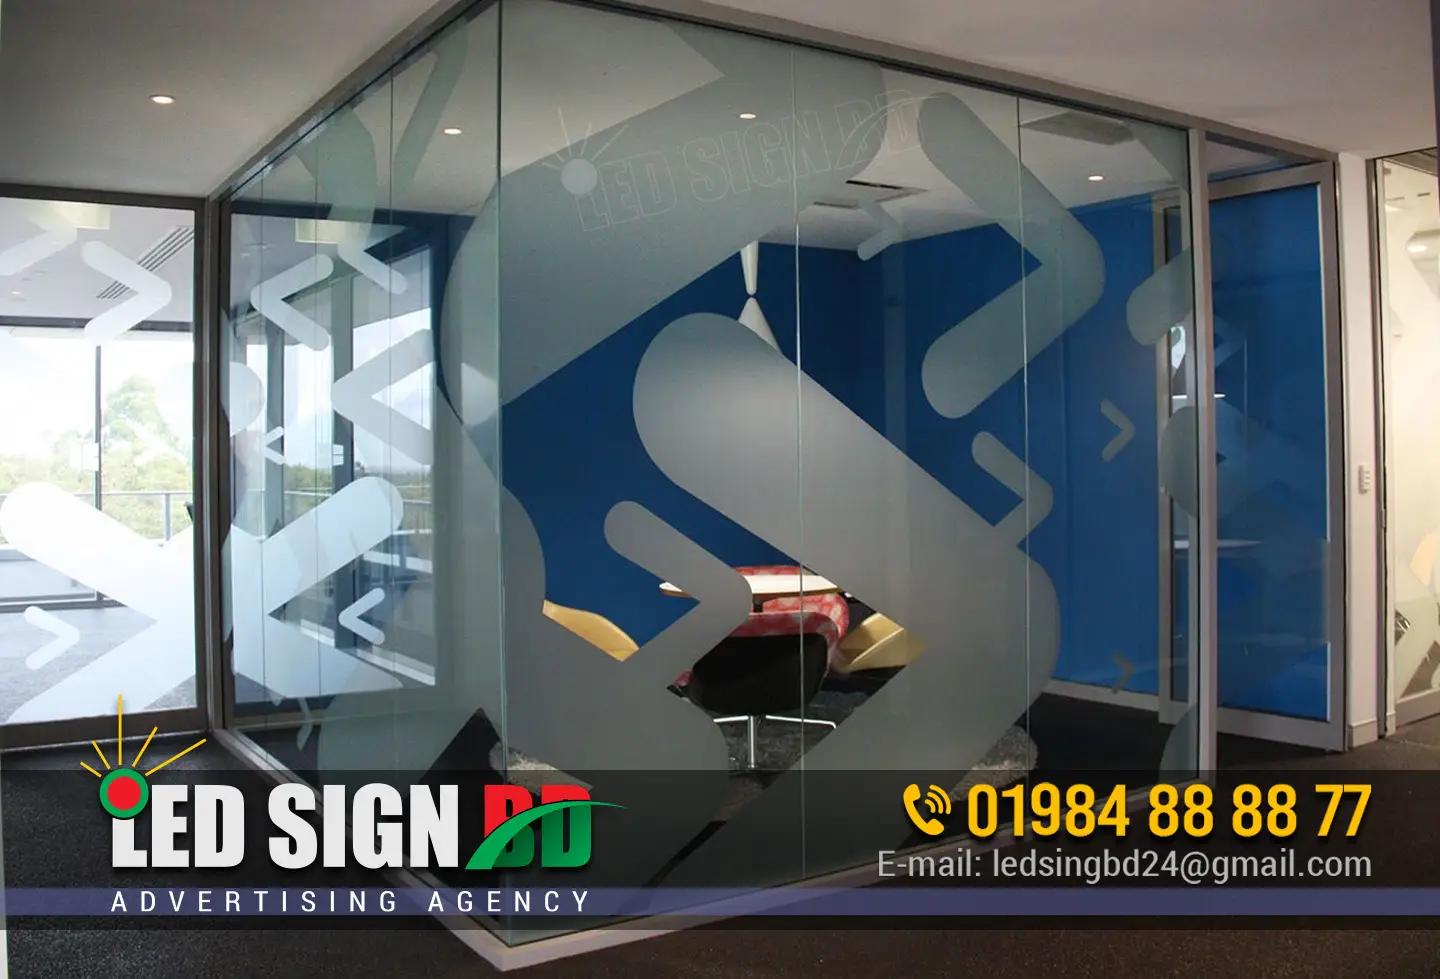 Thai Aluminium Glass Sticker, Office Frosted Frivacy Sticker.